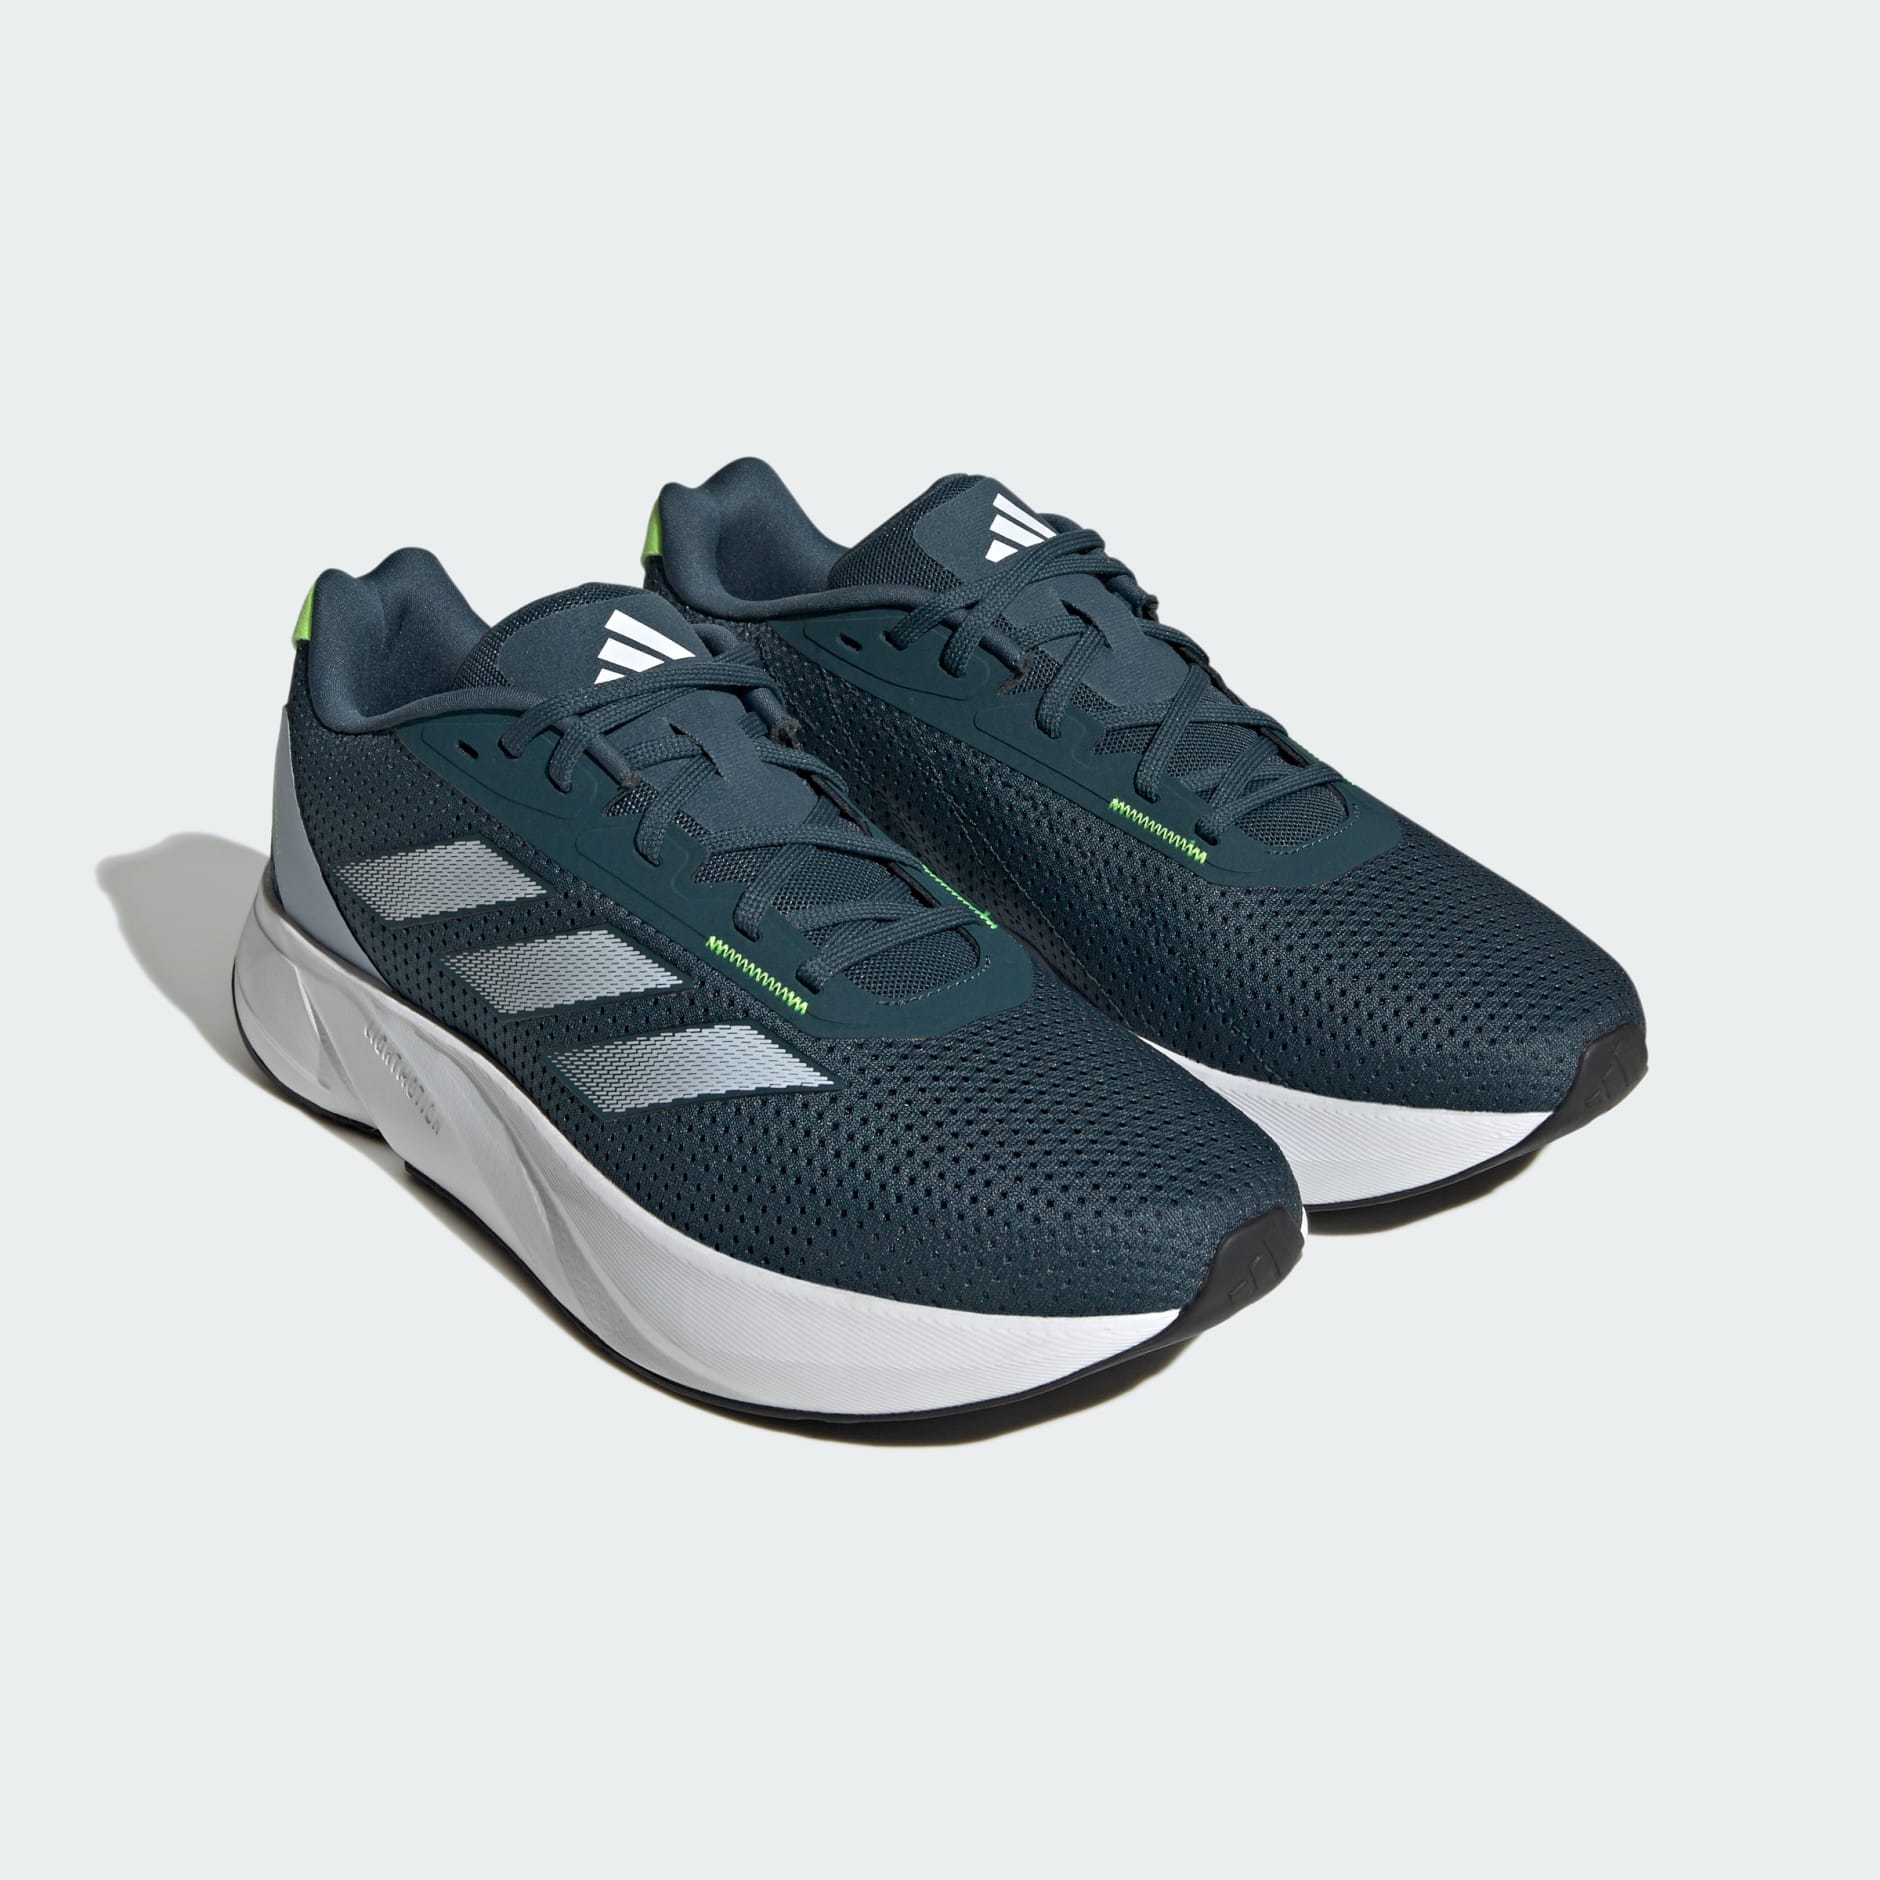 Shoes - Duramo SL Shoes - Turquoise | adidas South Africa